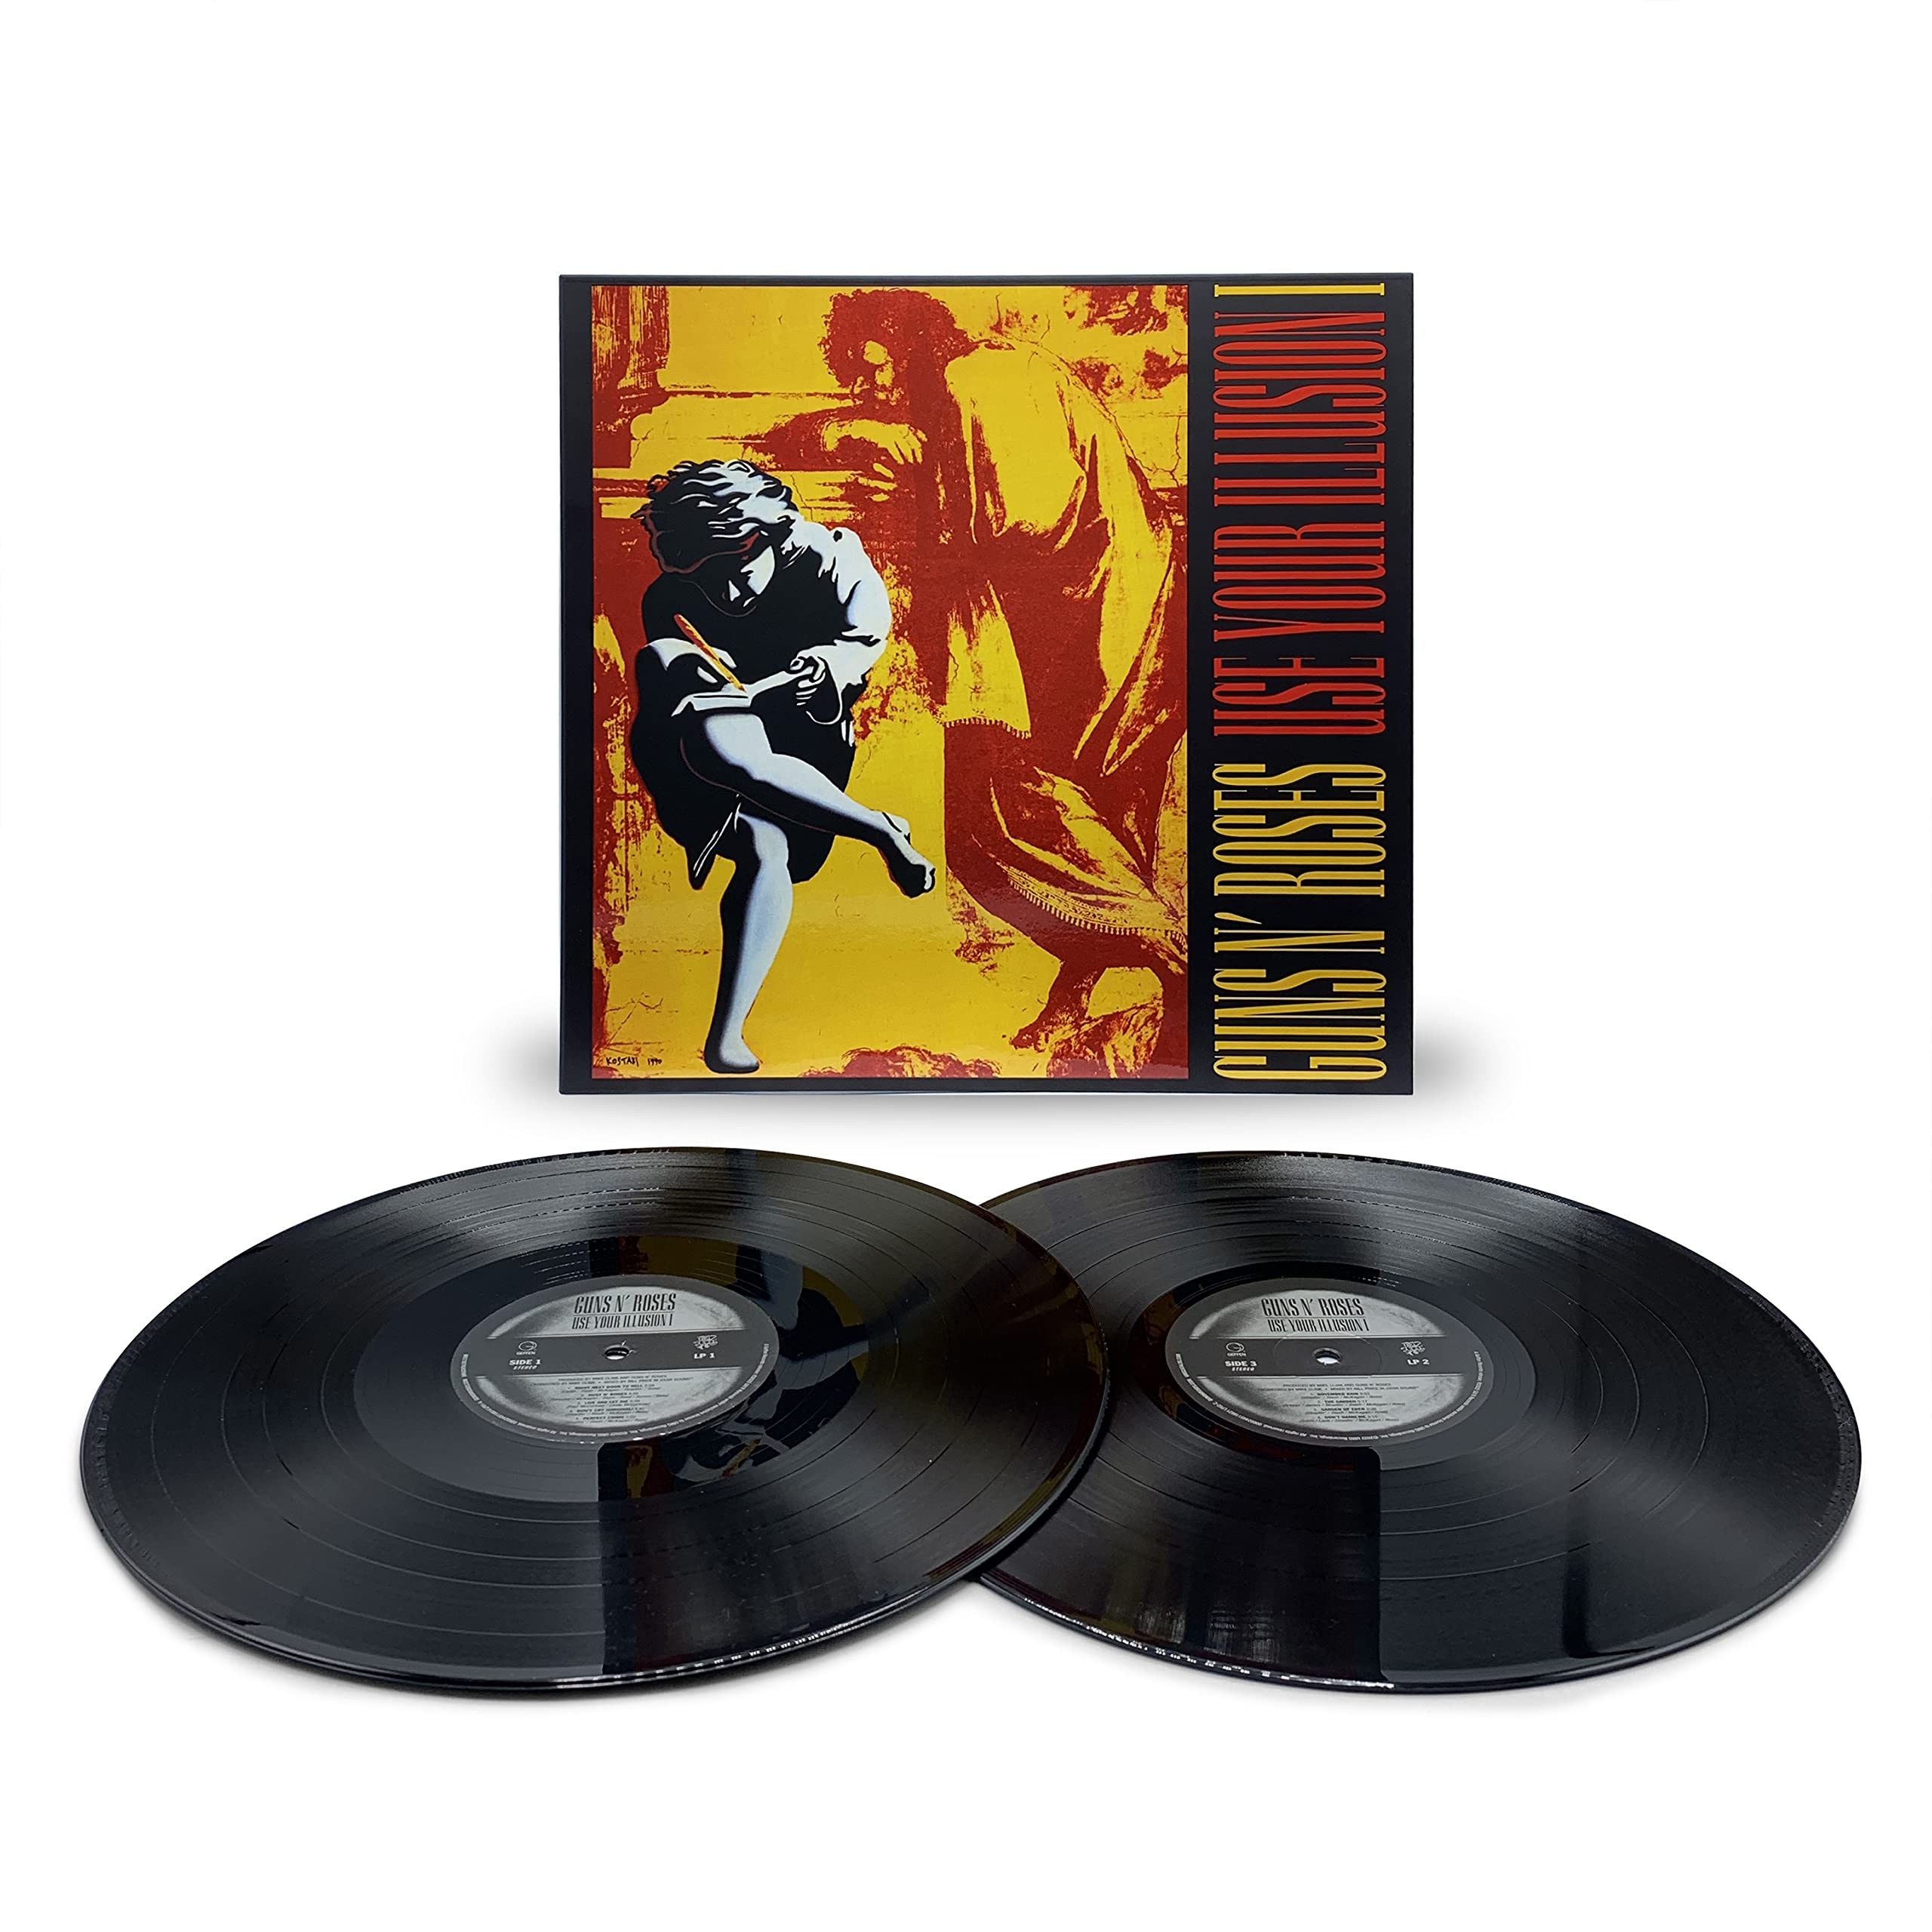 Use Your Illusion I (2LP 180g)